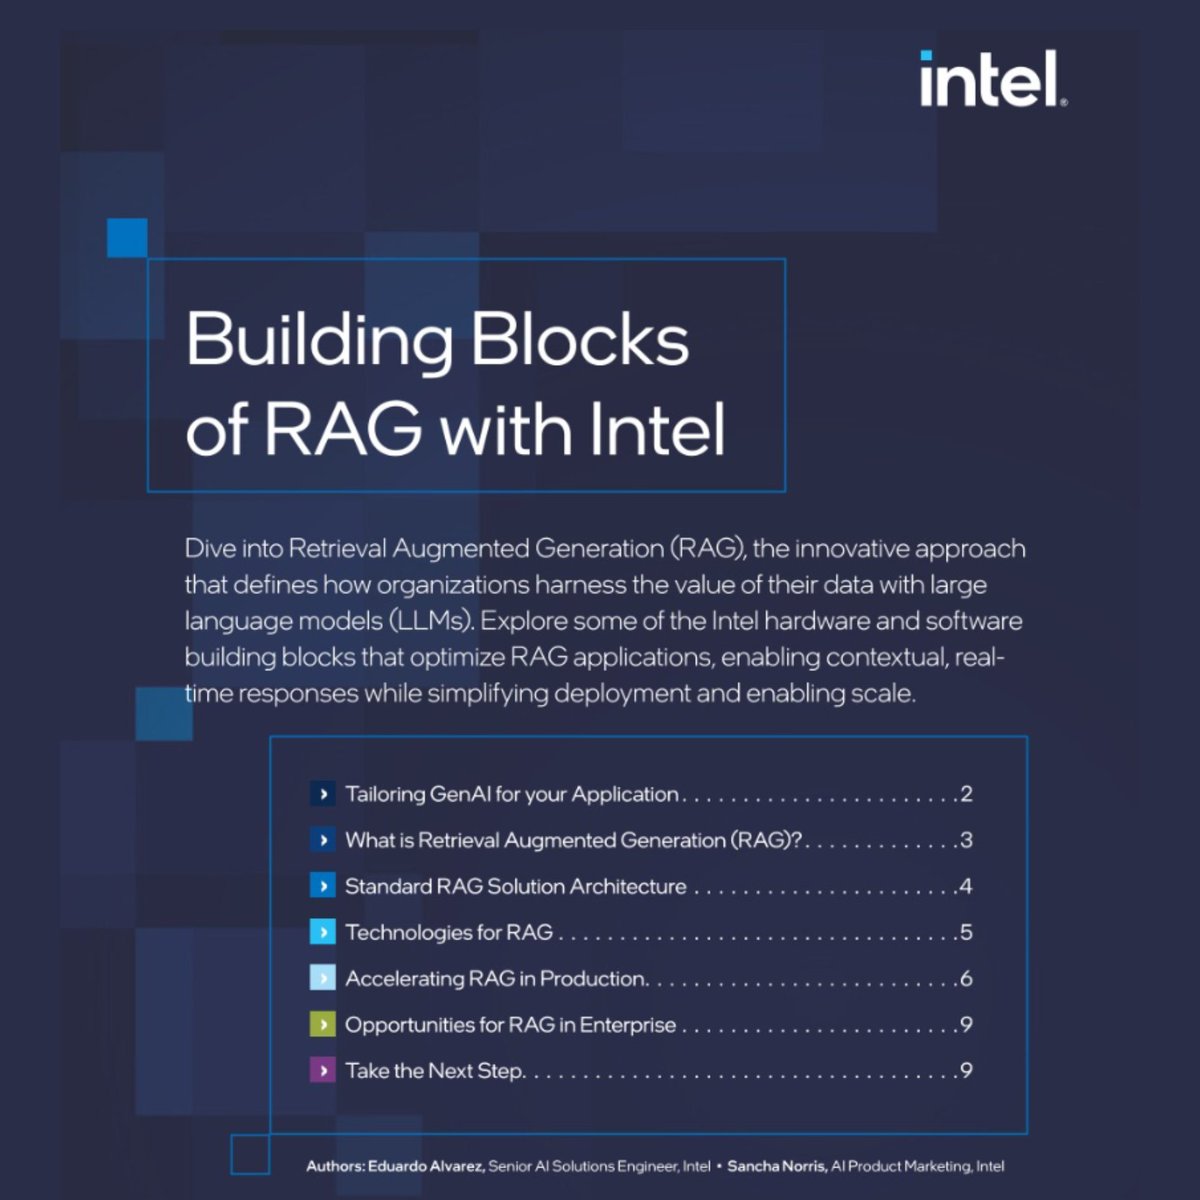 Explore how Intel's tech supercharges Retrieval Augmented Generation (RAG) in our new eBook! Discover faster, more secure applications with Intel Xeon CPUs & Gaudi Accelerators. Unlock potential in retail, manufacturing, & finance.   

Ready to innovate? linkedin.com/feed/update/ur…